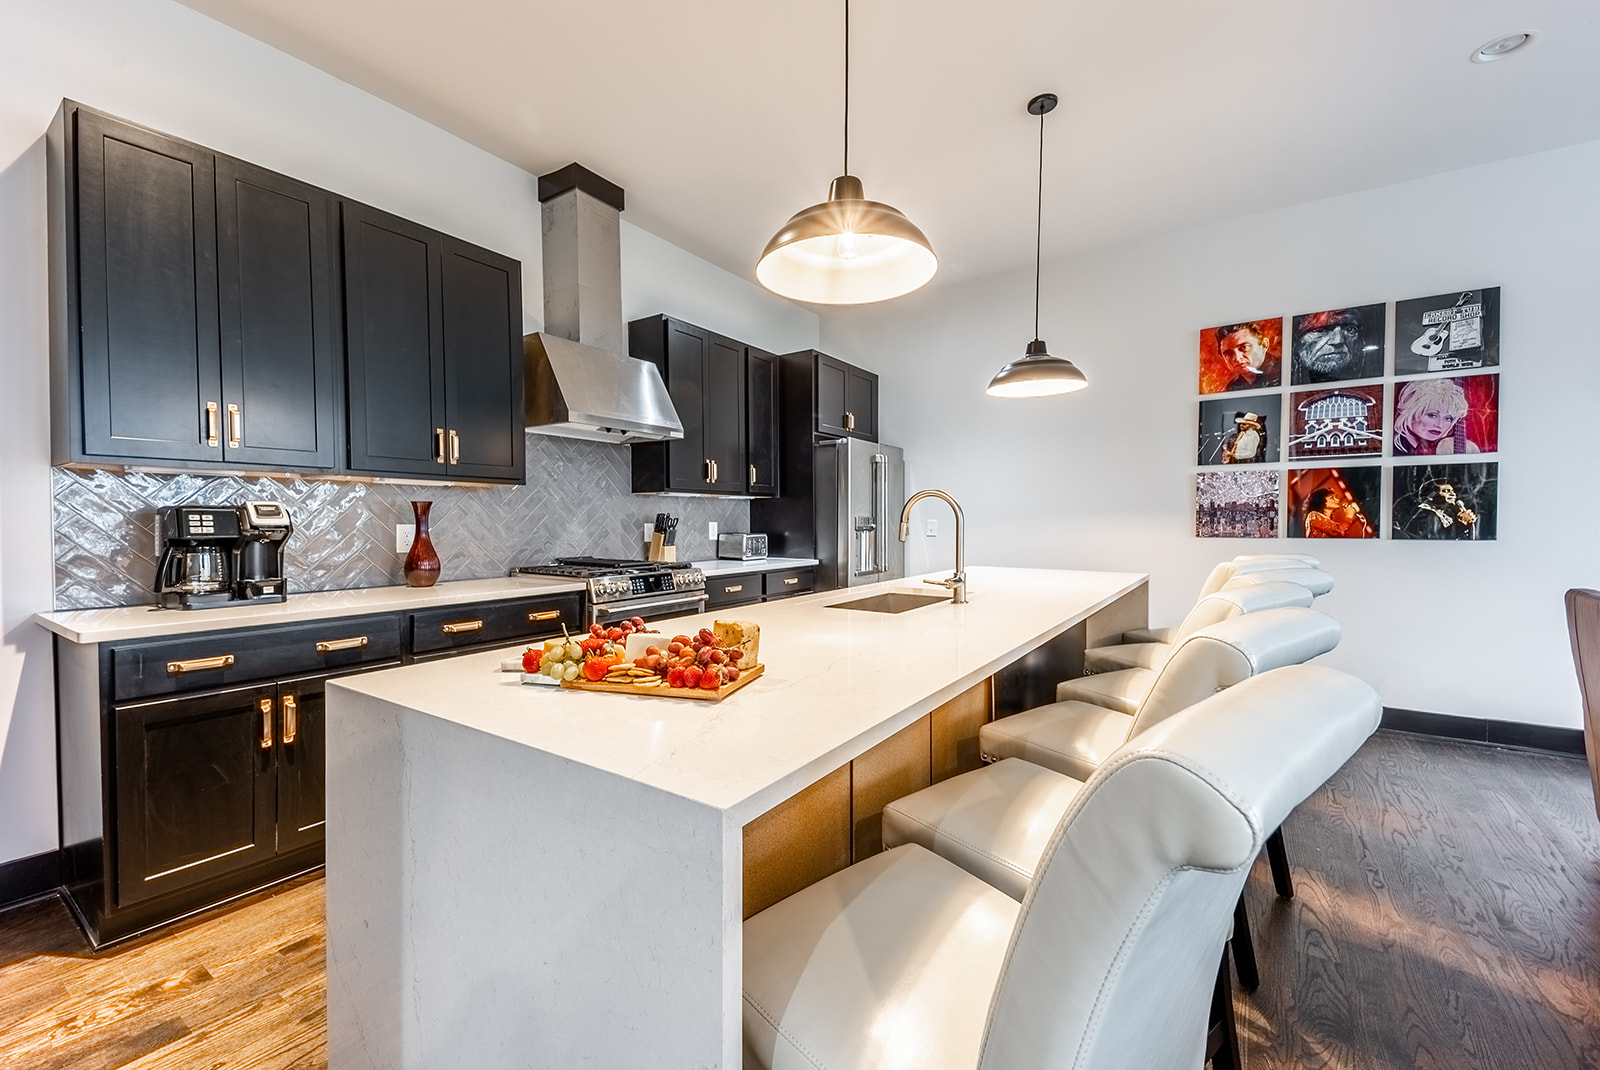 Unit 1: Fully equipped Kitchen with stainless steel appliances and breakfast bar seating.